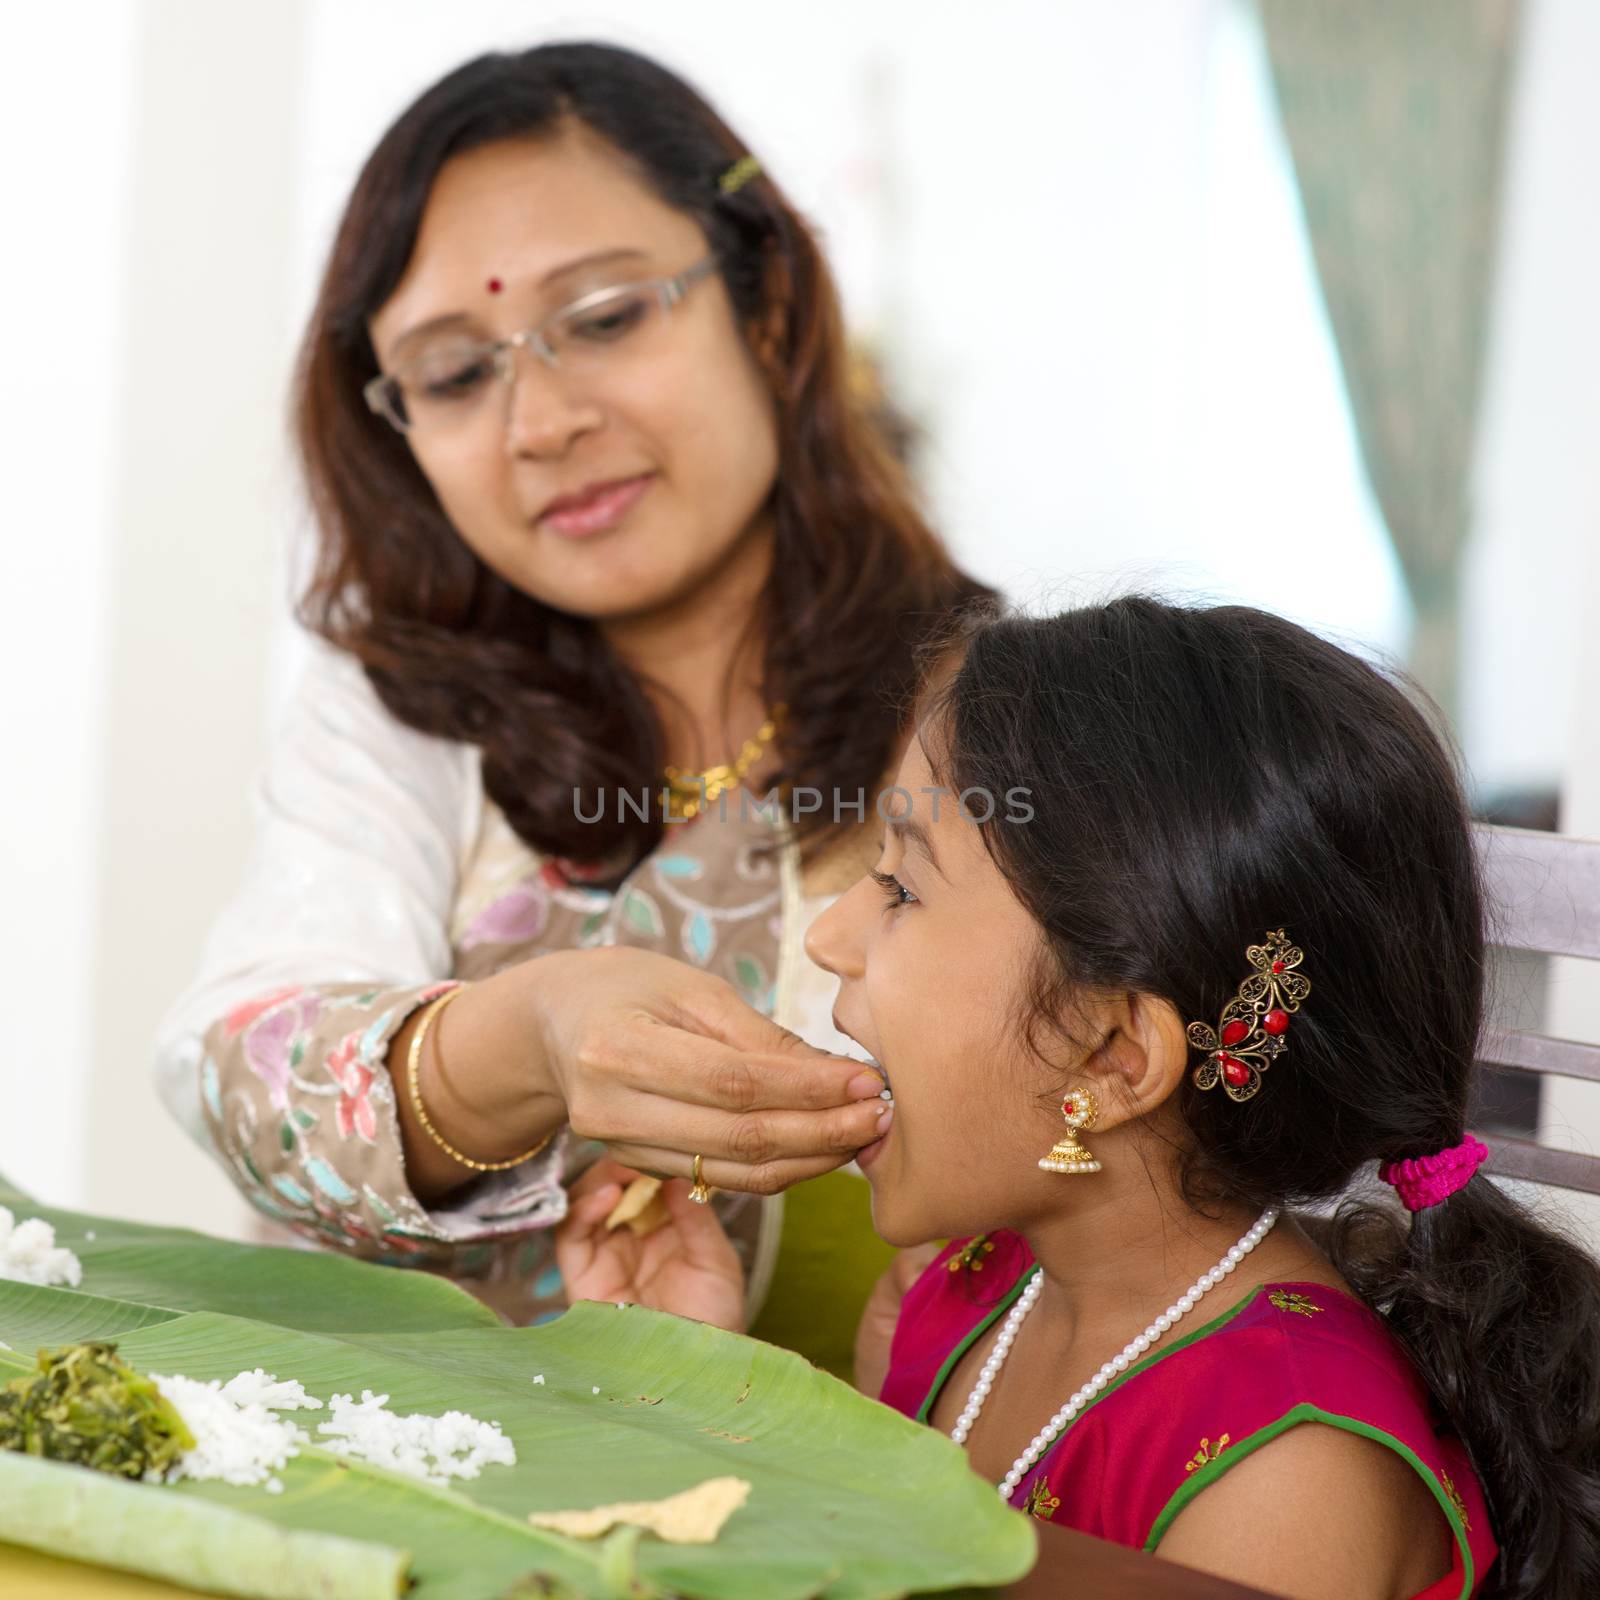 Indian family dining at home. Candid photo of Asian mother feeding rice to child with hand. India culture.